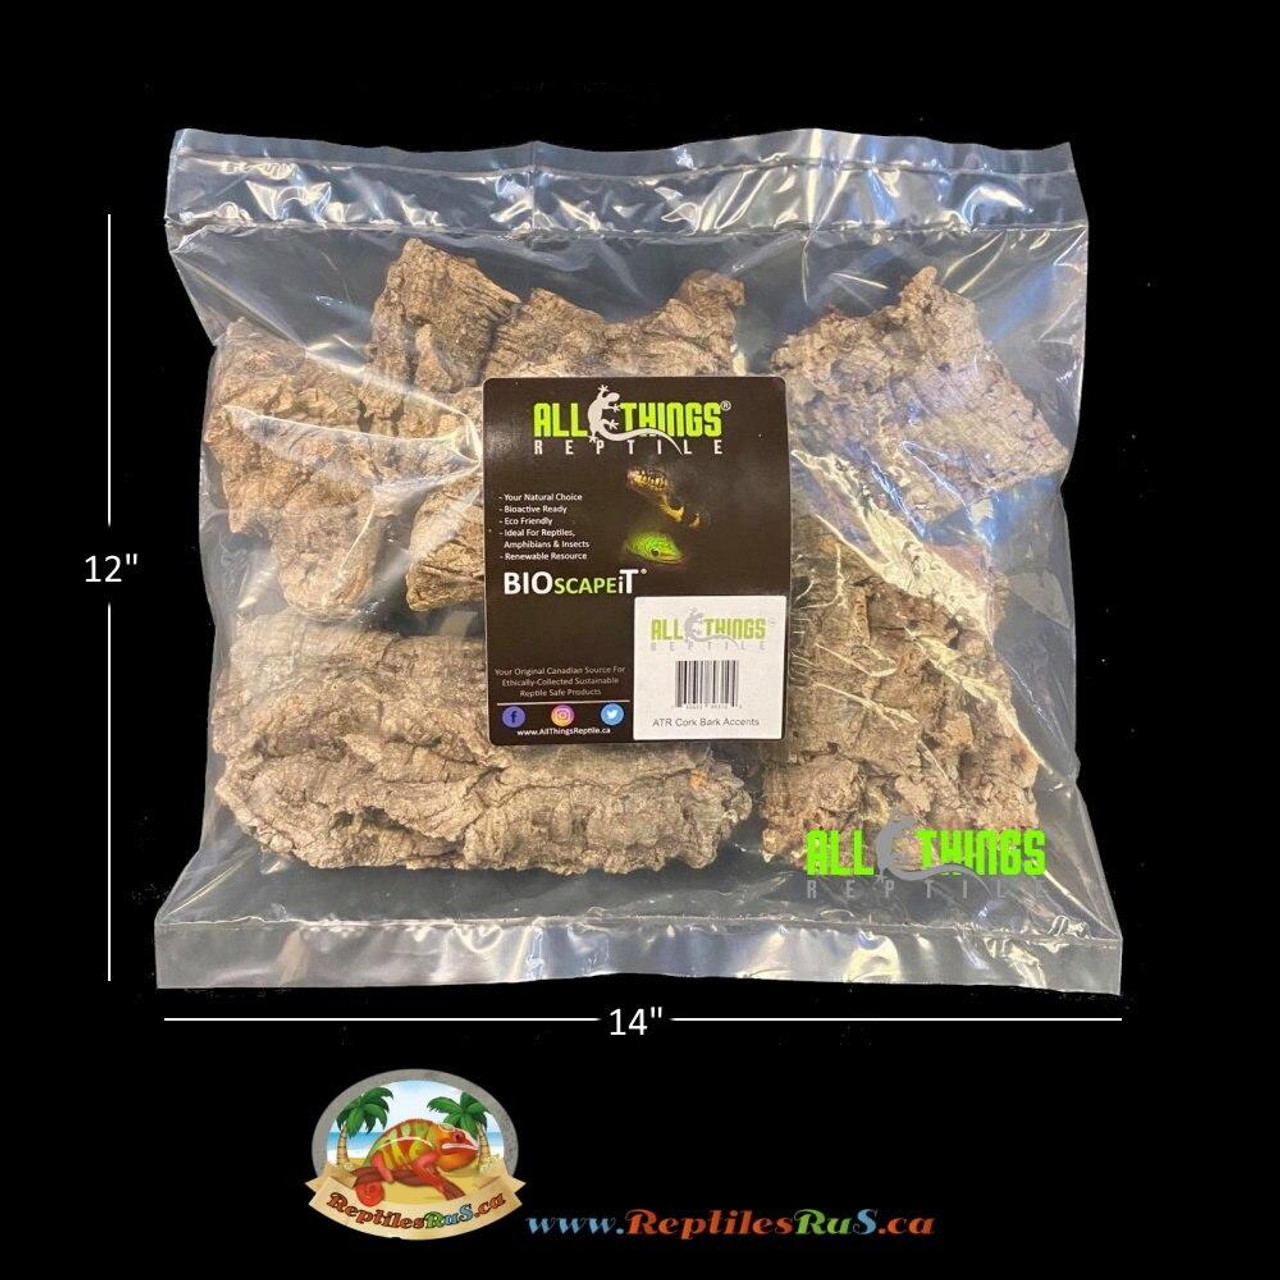 All Things Reptile ATR Cork Bark Accent approx 1Lb